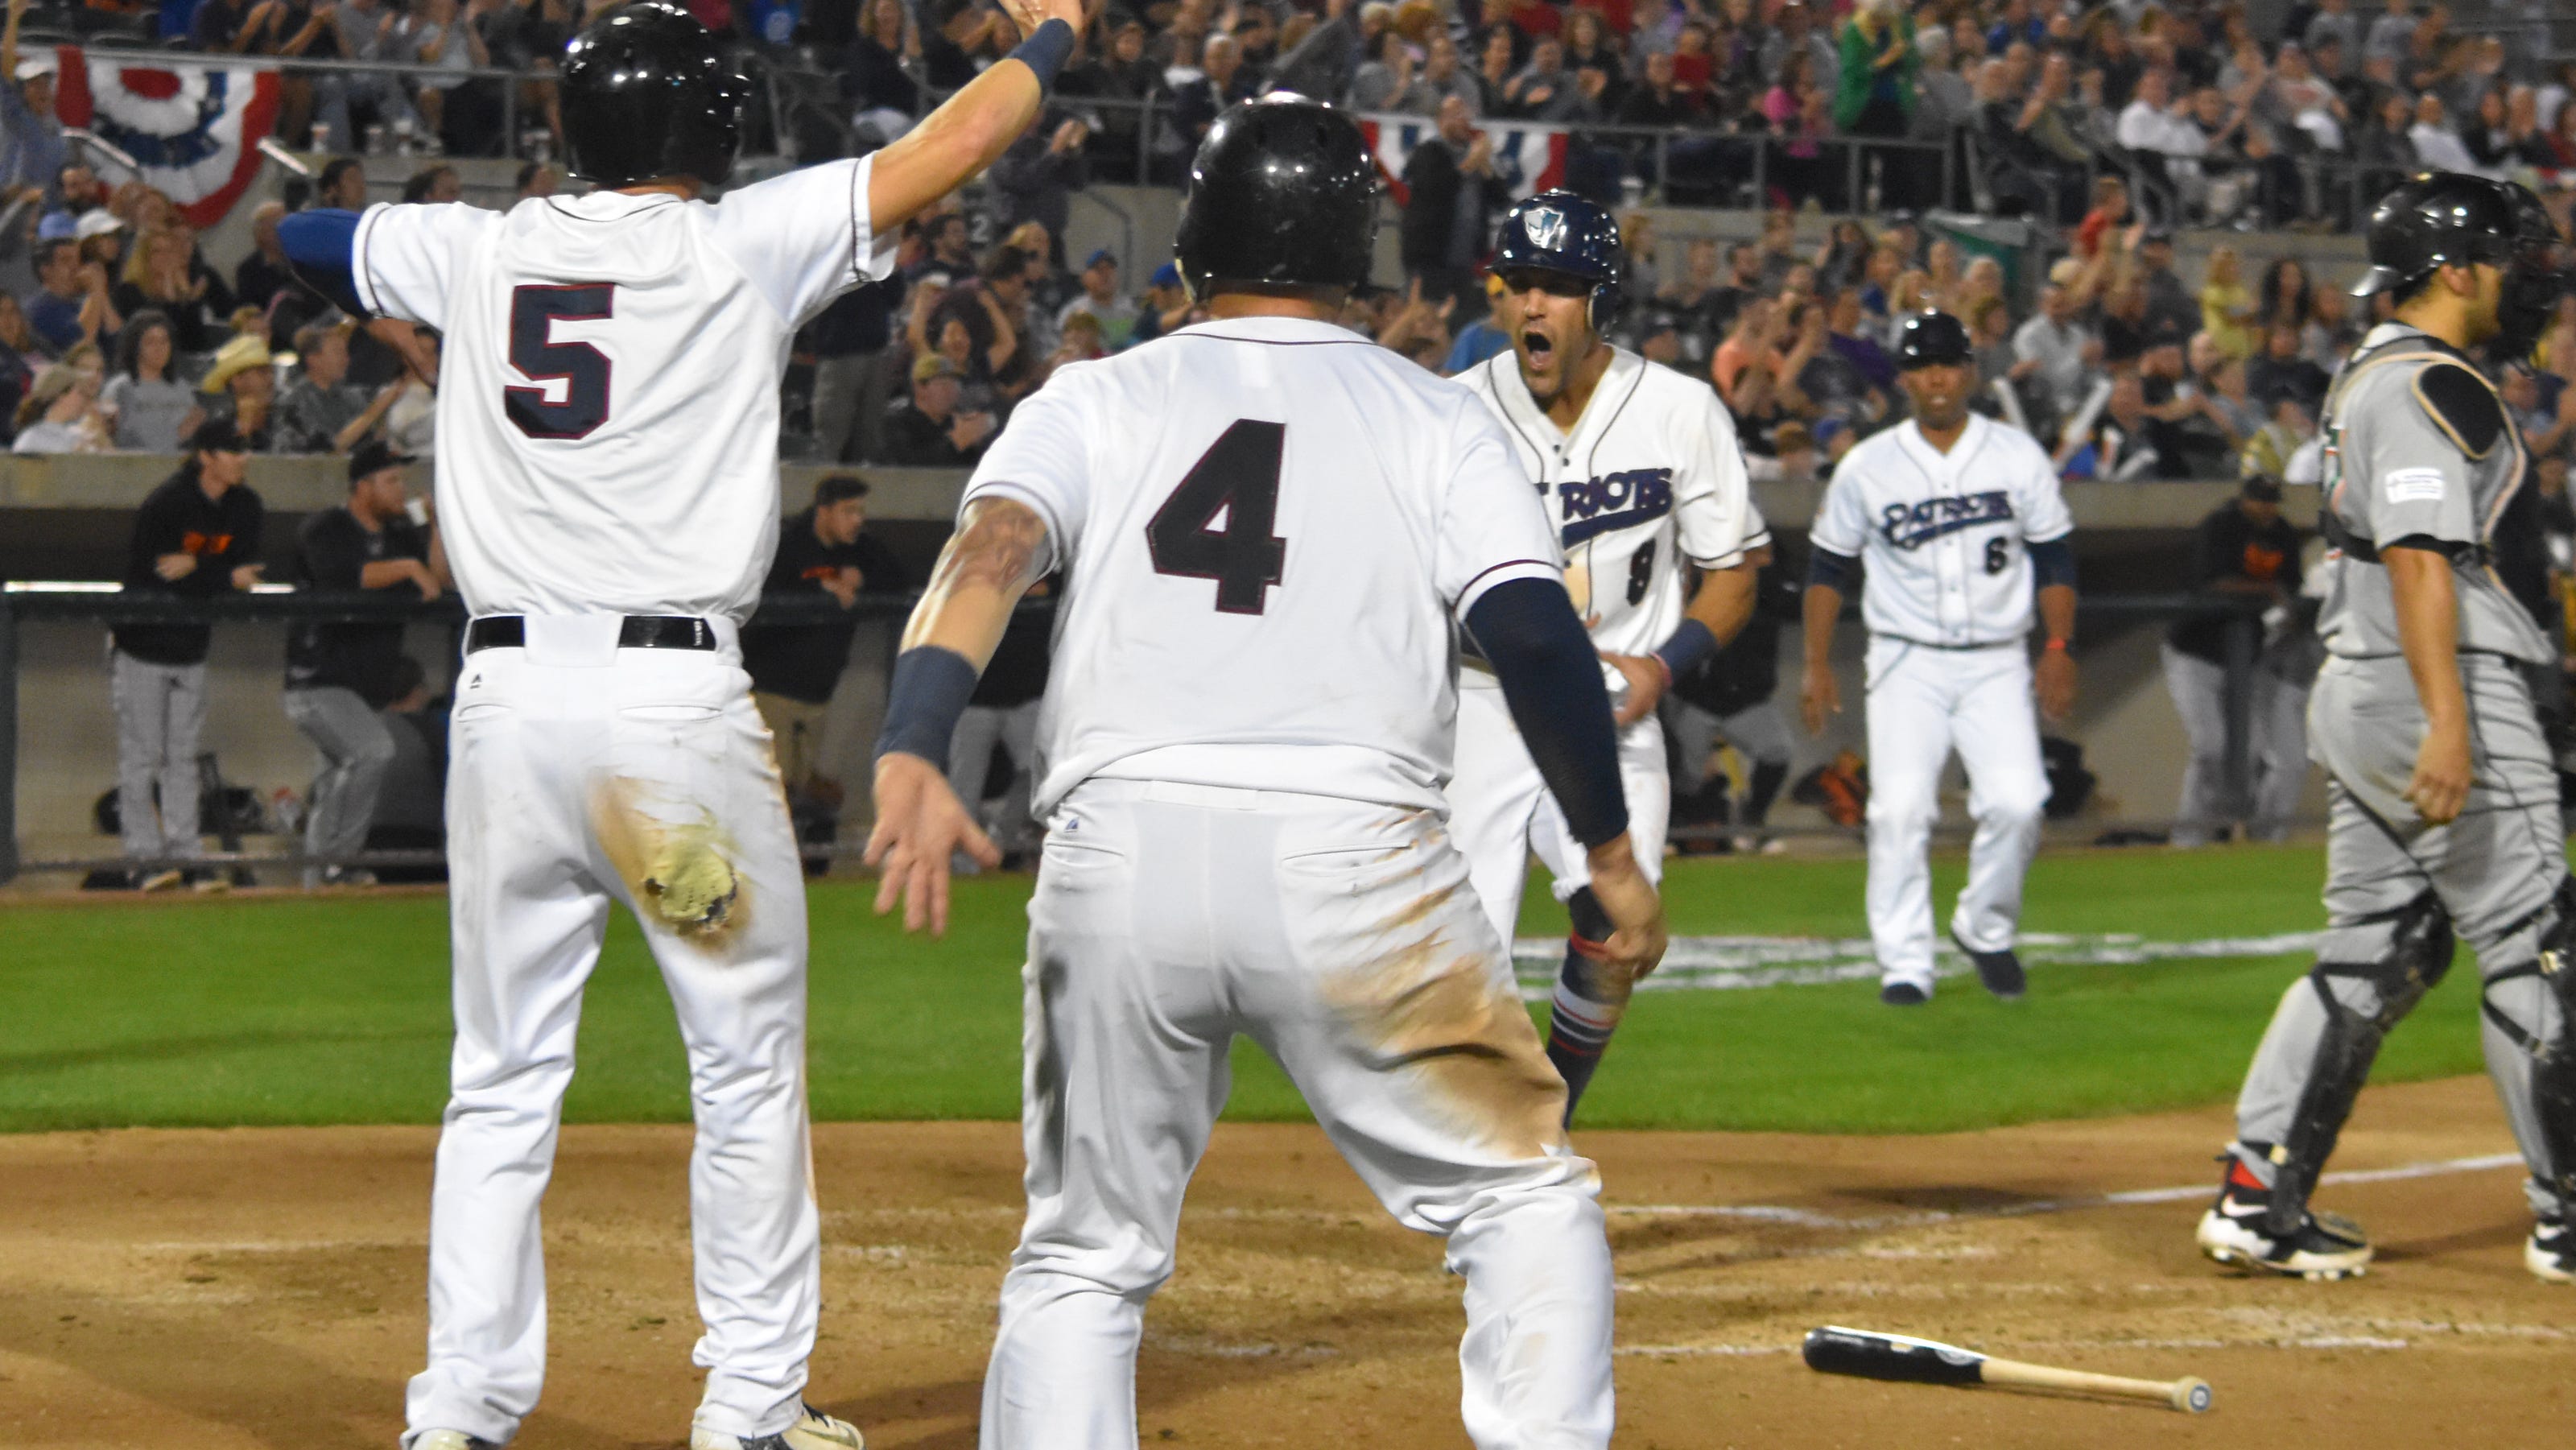 Somerset Patriots announce 2021 season schedule as Yankees affiliate